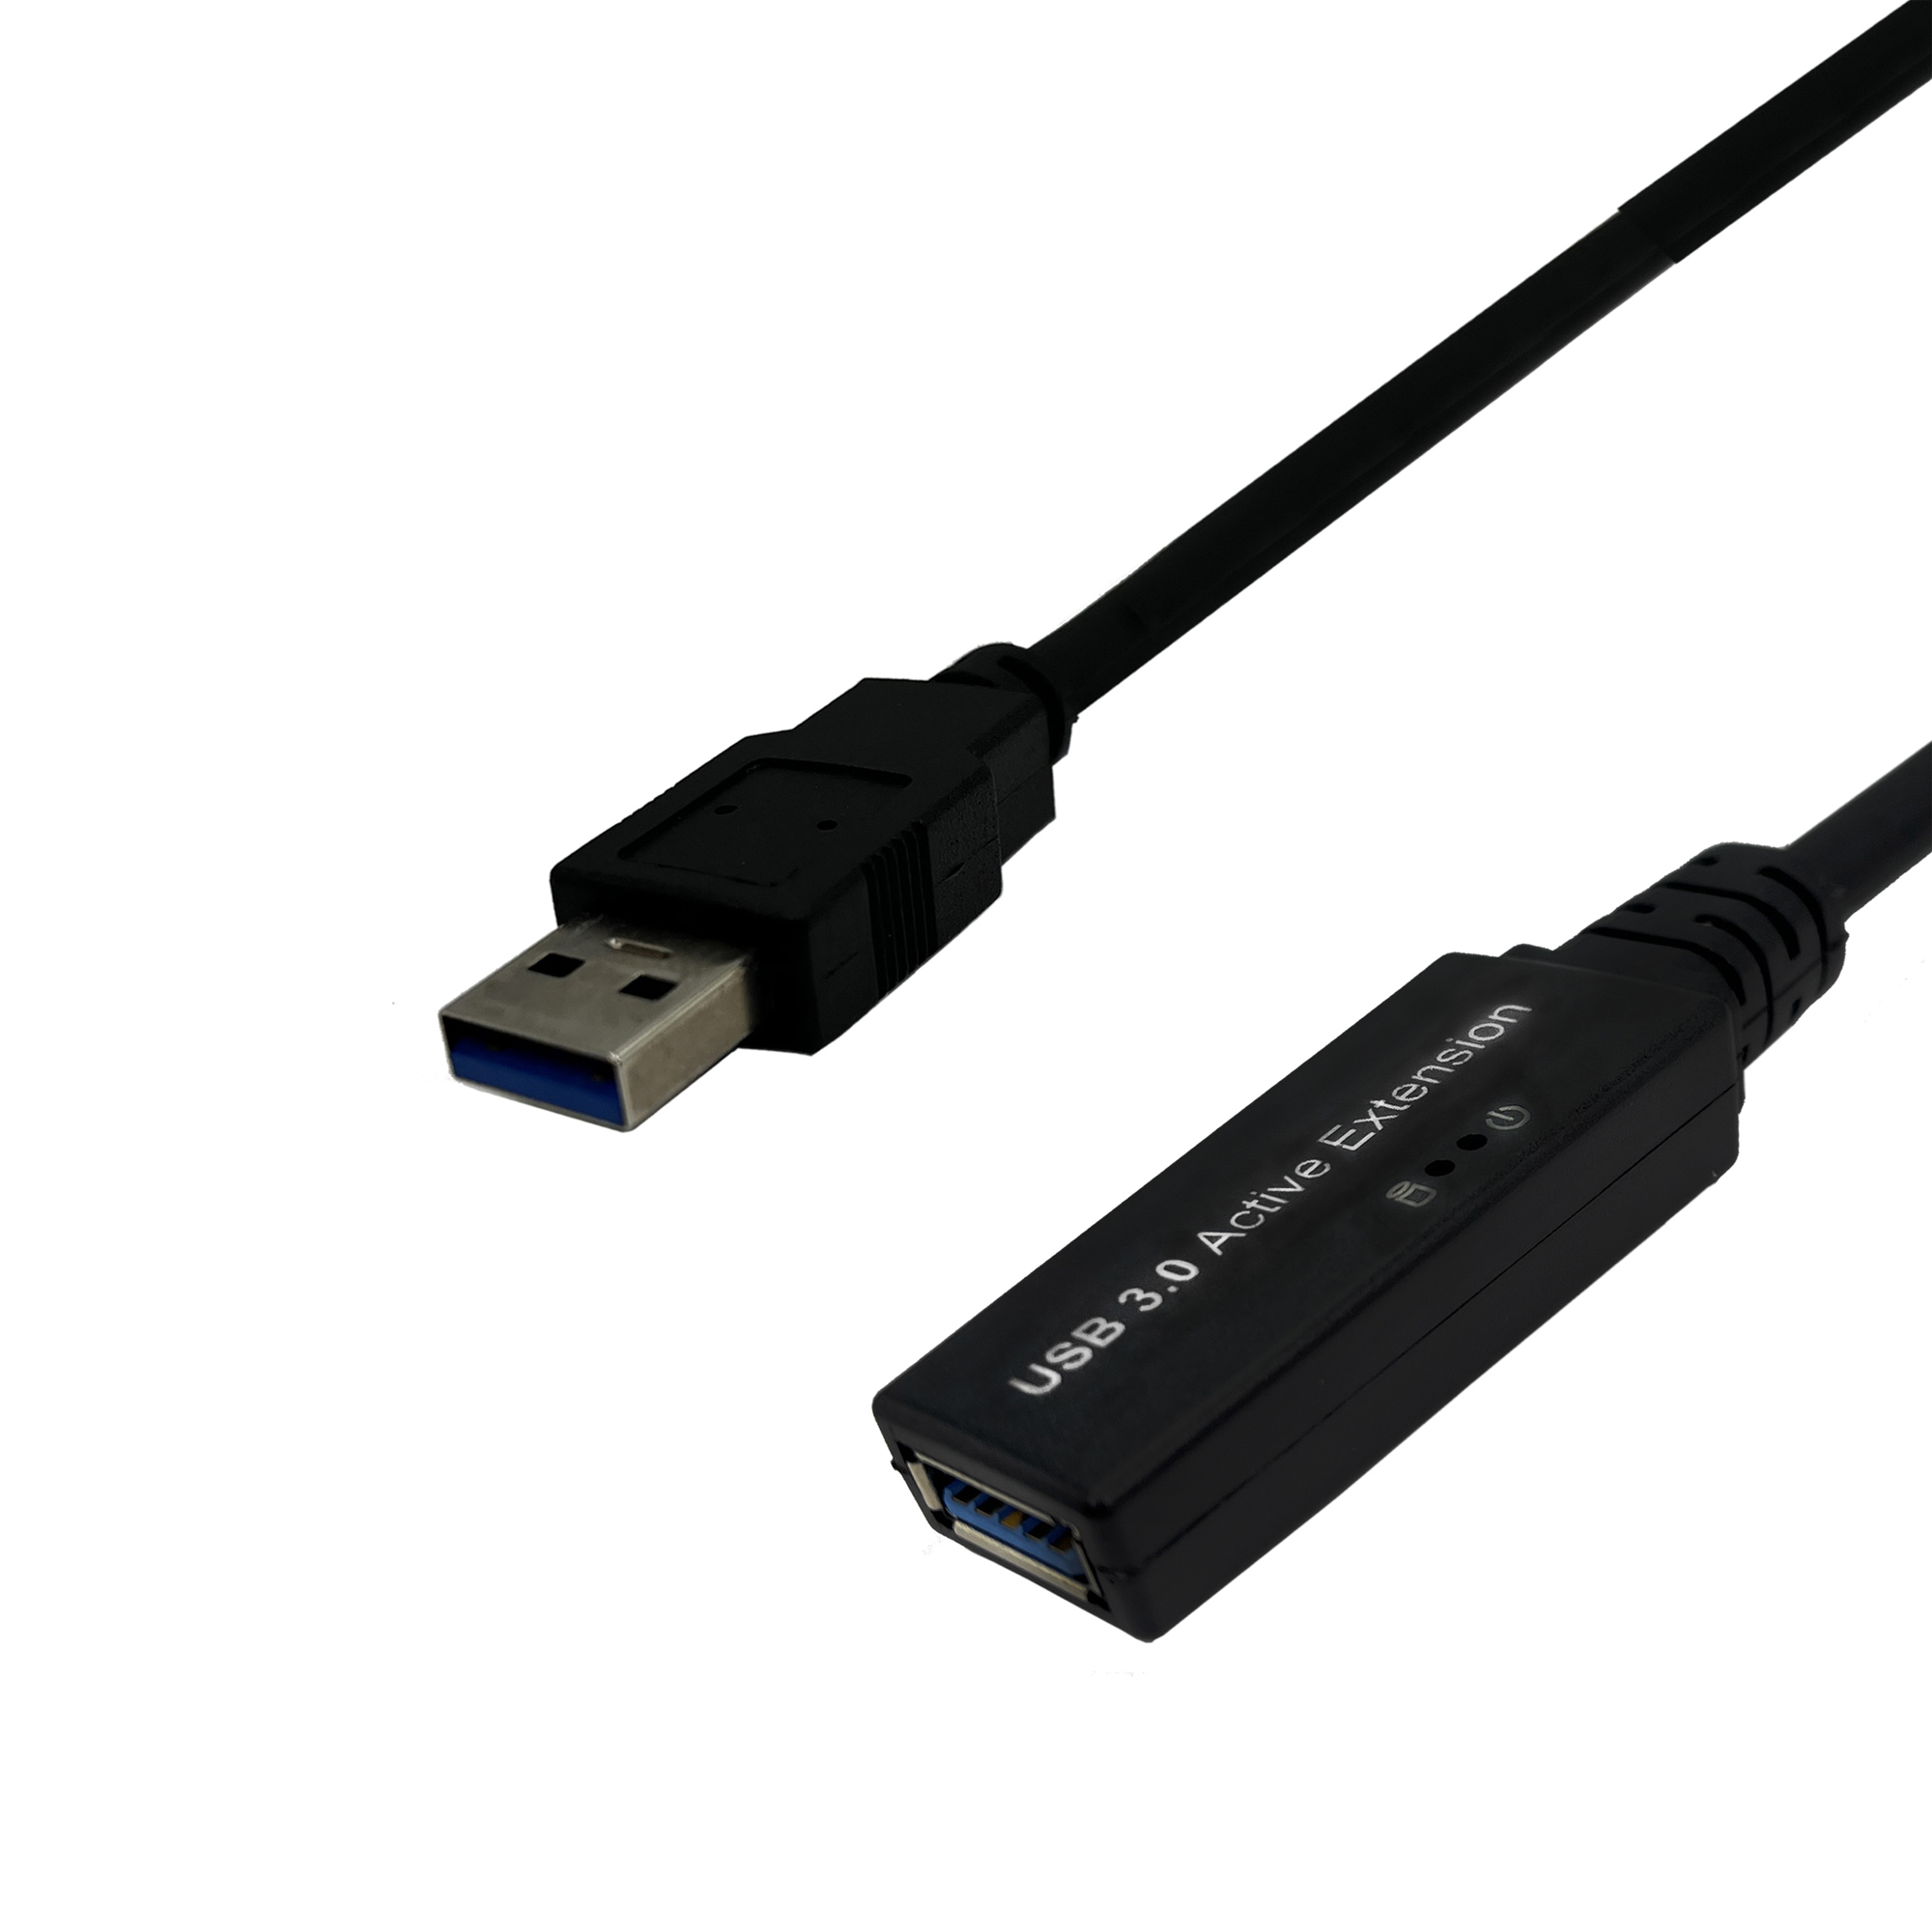 Photos - Cable (video, audio, USB) GEAR connektgear 10m USB 3 Active Extension Cable A Male to A Female - High 26 